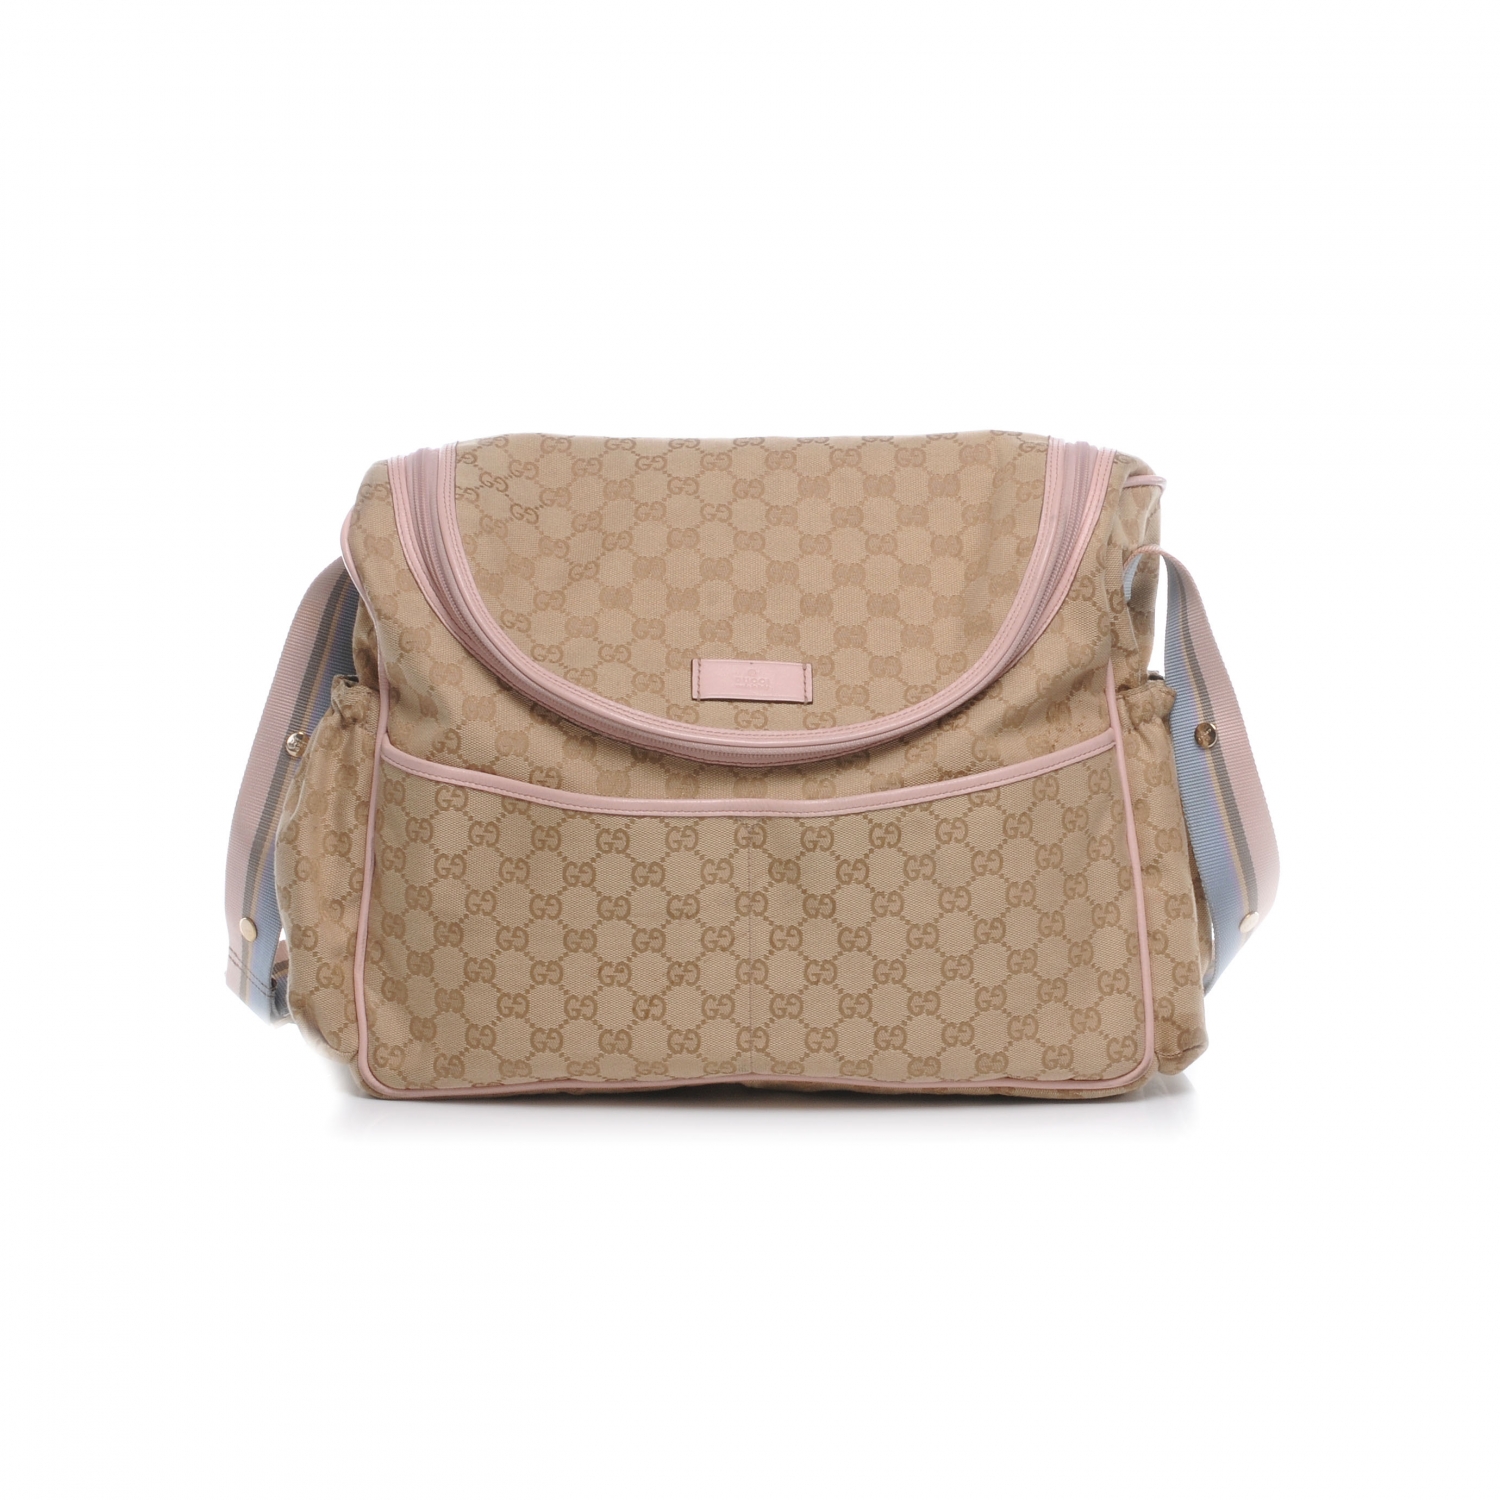 gucci bag with pink trim